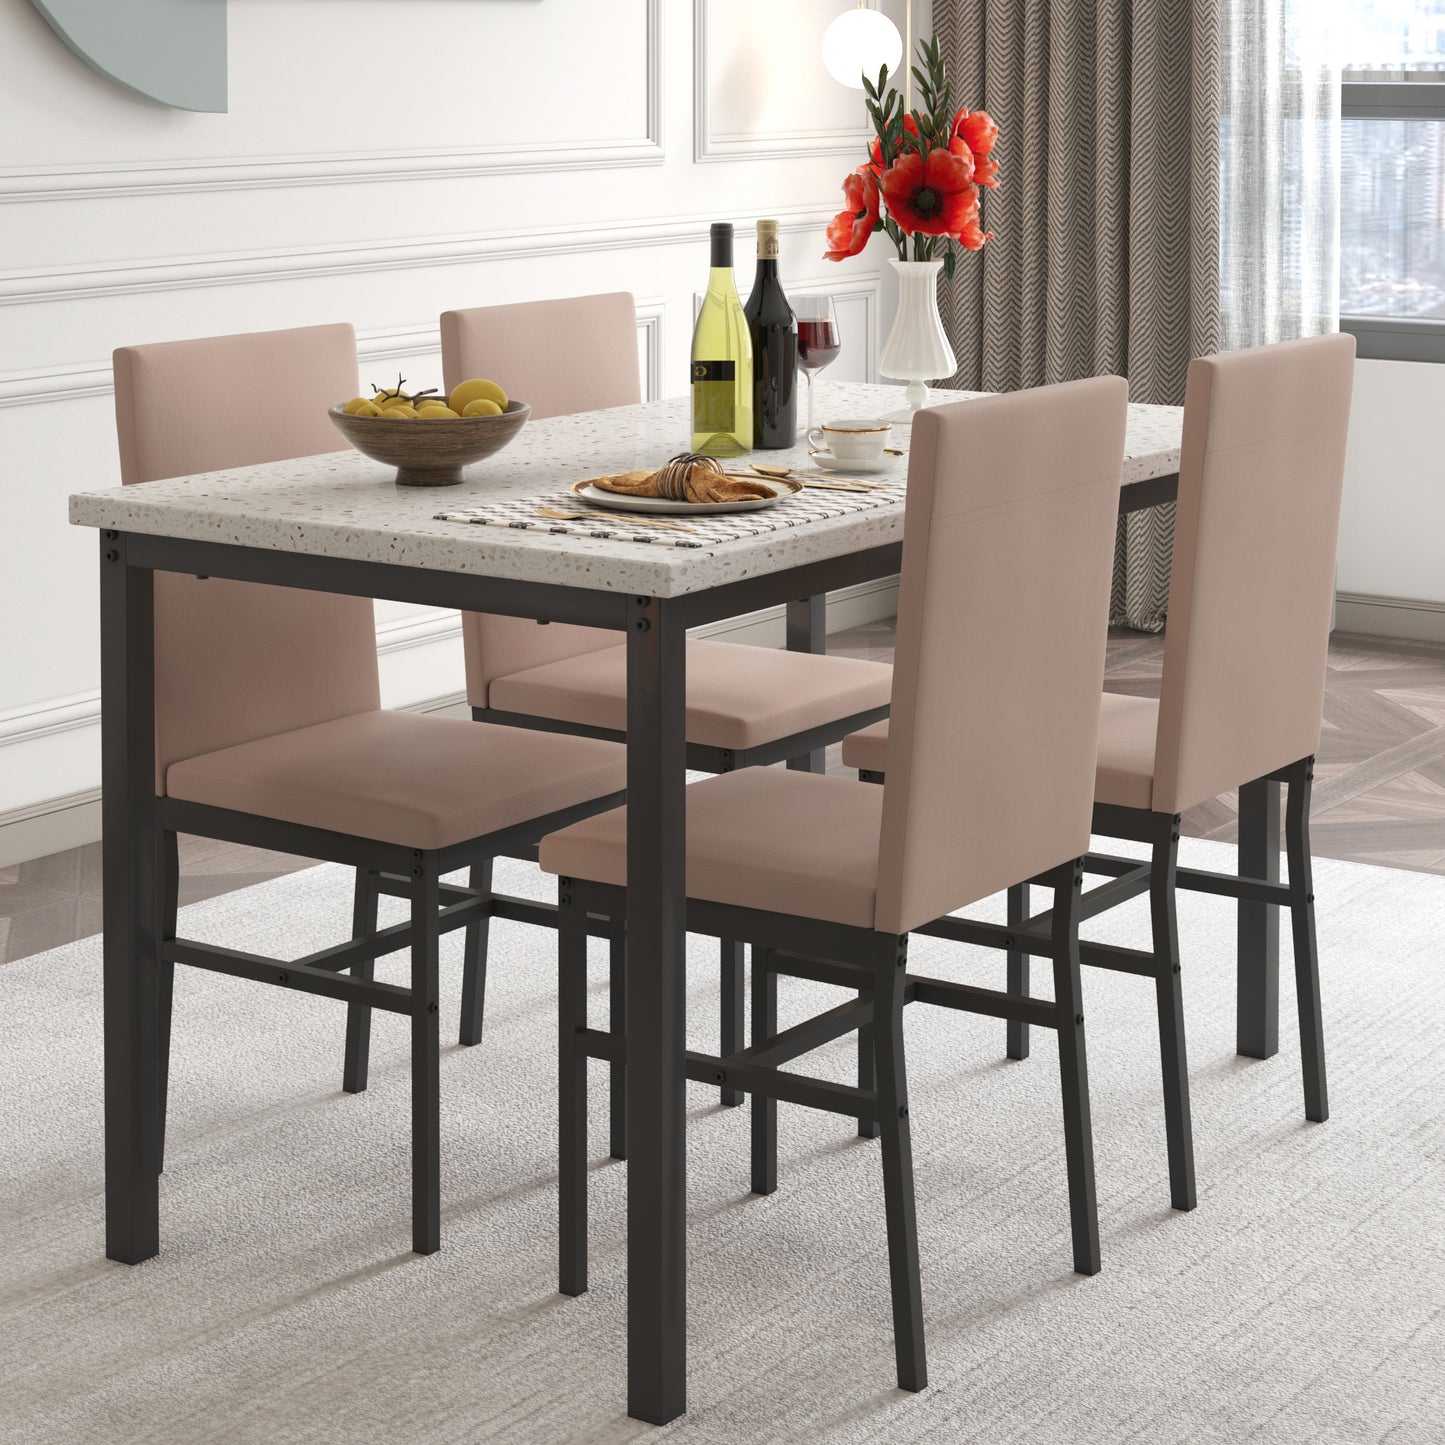 SYNGAR 7 Piece Dining Table Set, Kitchen Dining Table and Chairs Set for 6, Modern Marble Table and 4 PU Leather Upholstered Chairs, Home Dining Set for Small Space, Breakfast Nook, D9210